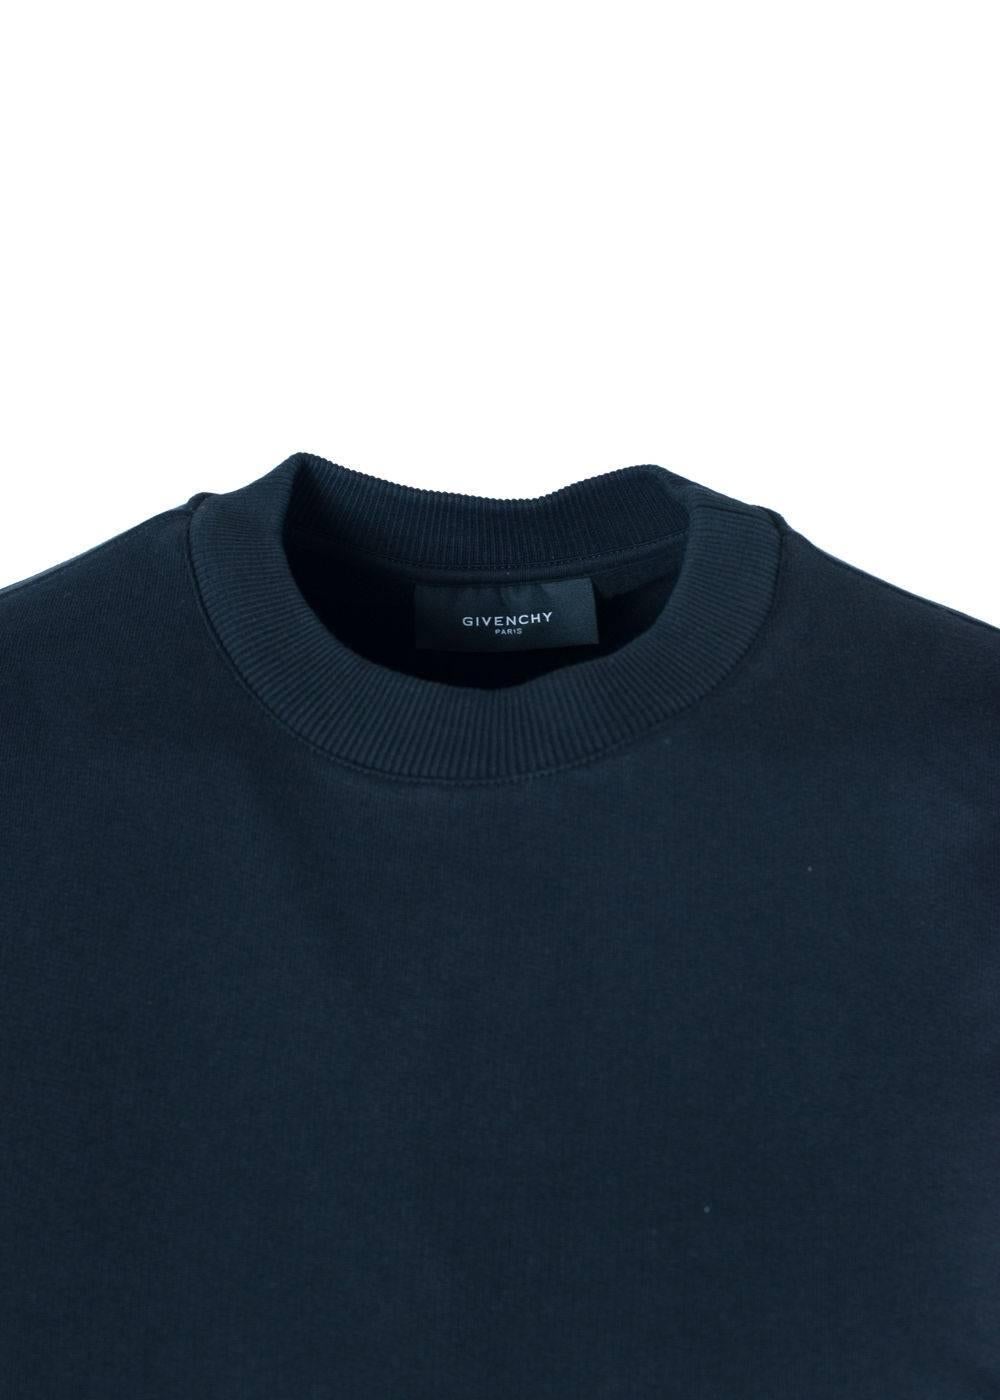 Brand New Givenchy Men's Sweatshirt
Original Tag
Retails in Stores & Online for $695
Men's Size S Fits True to Size

Givenchy's simplistic and minimalistic sweatshirt in a solid black tone with a rectangular graphic print on the back of top. Made